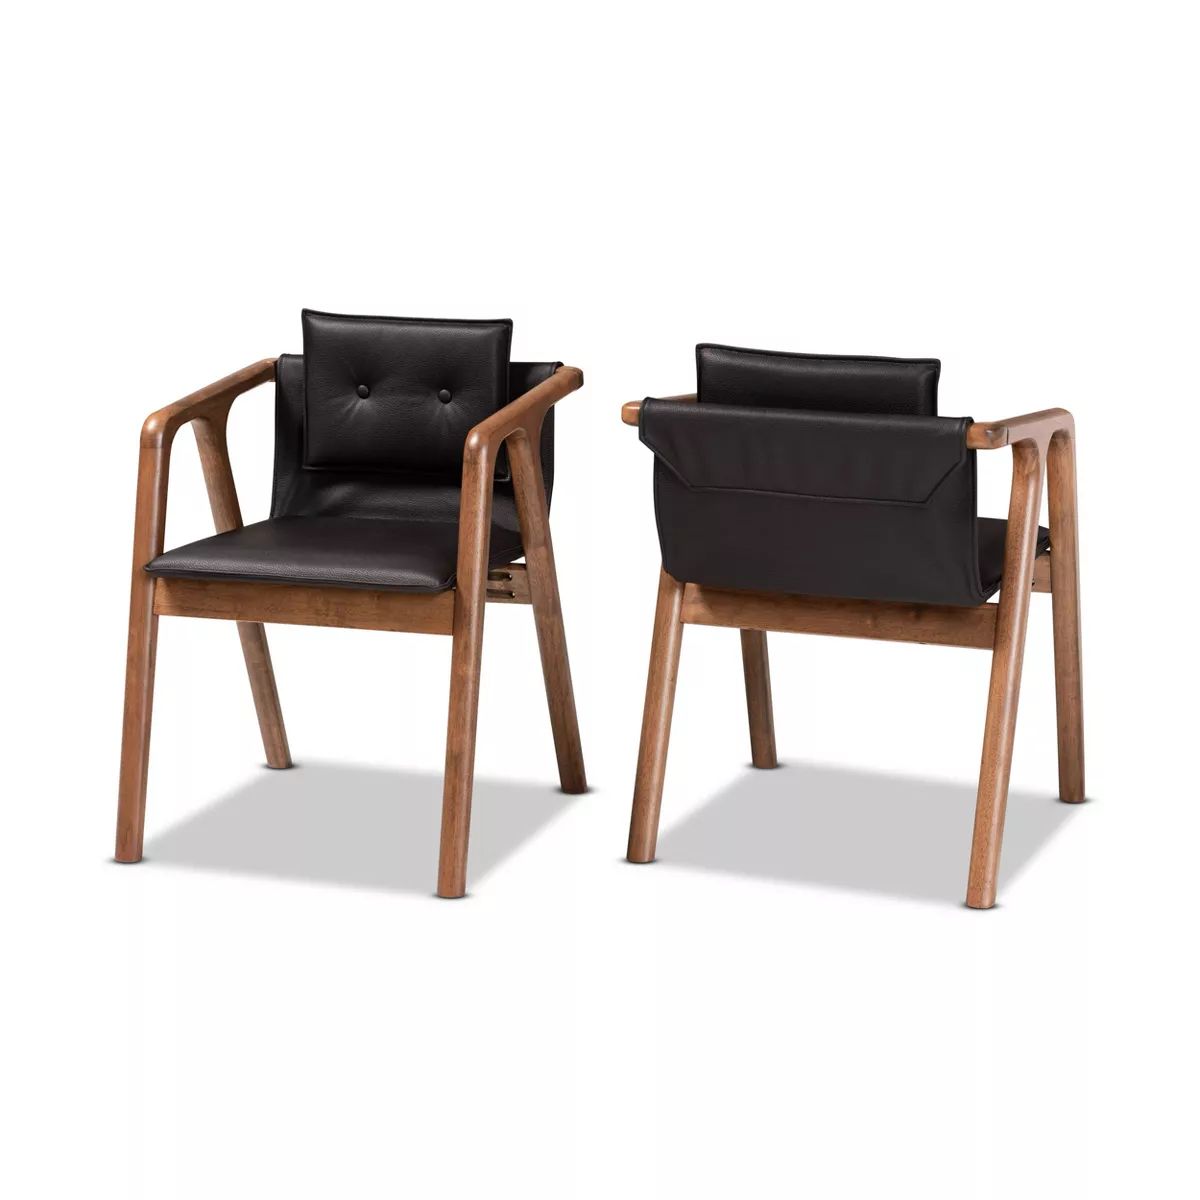 2pc Marcena Imitation Leather Upholstered and Wood Dining Chair Set - Baxton Studio | Target